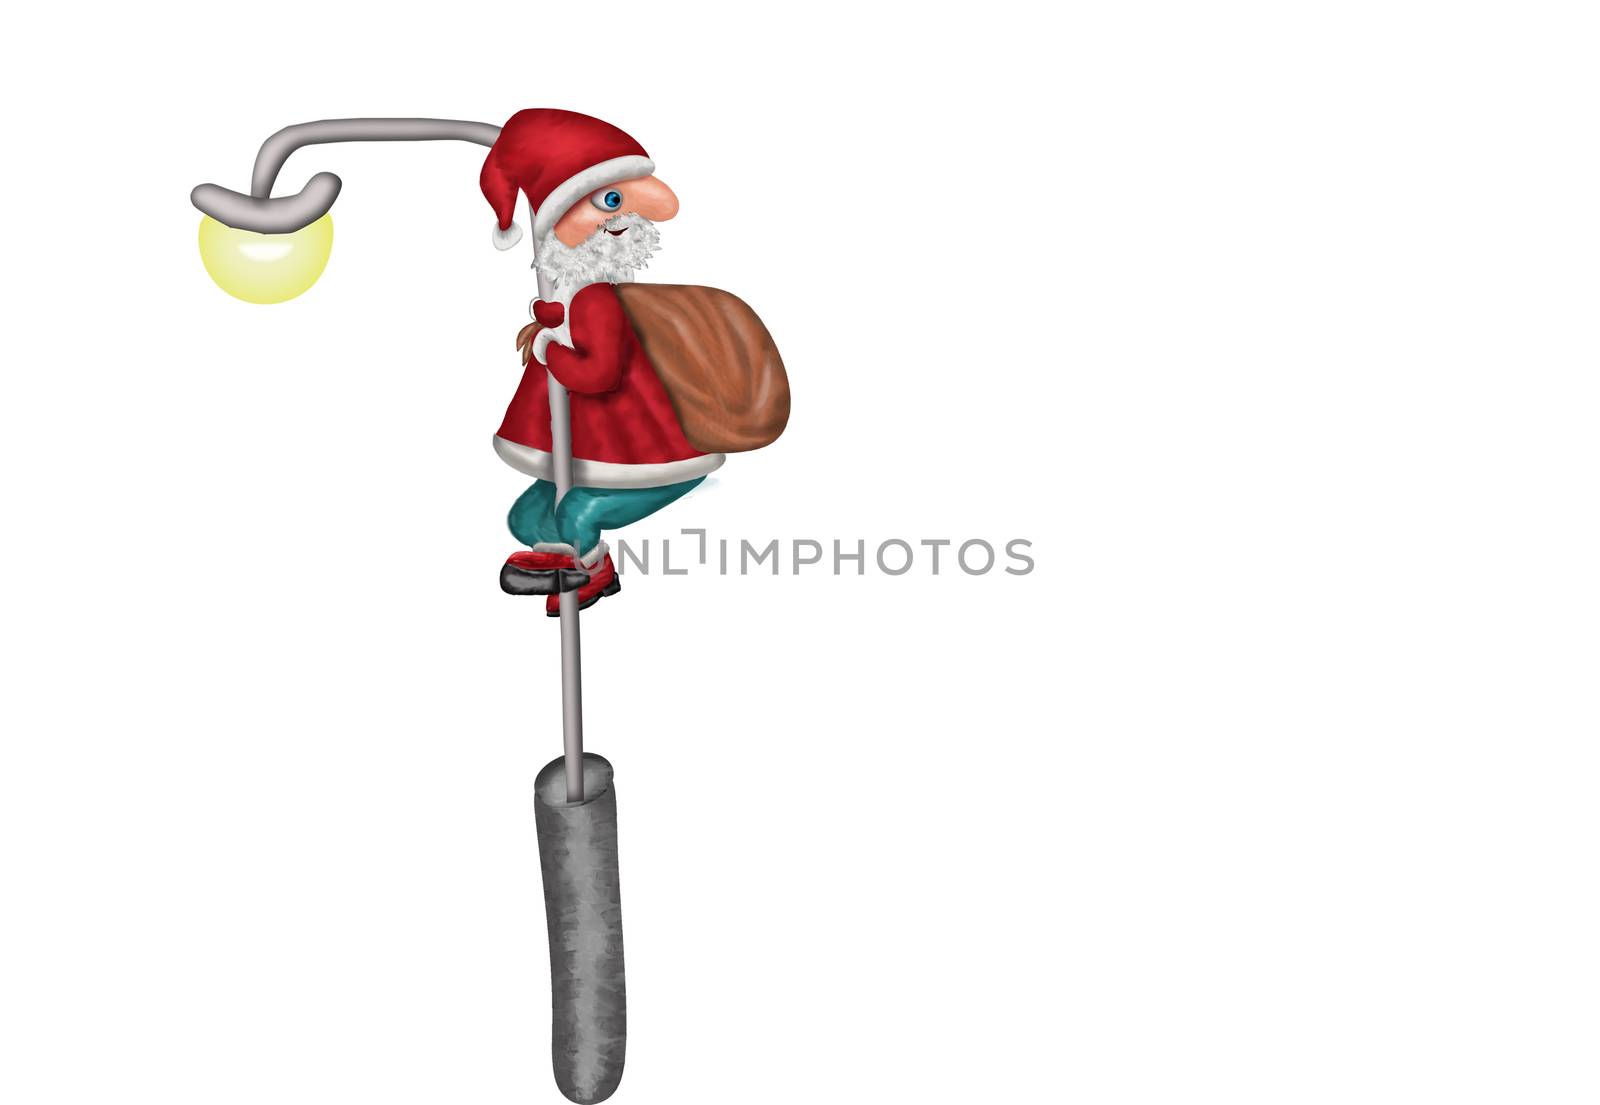 Cute friendly Santa Claus climbing a pillar with bag of gifts. Funny humorous winter holiday design element isolated on white background. Stock illustration